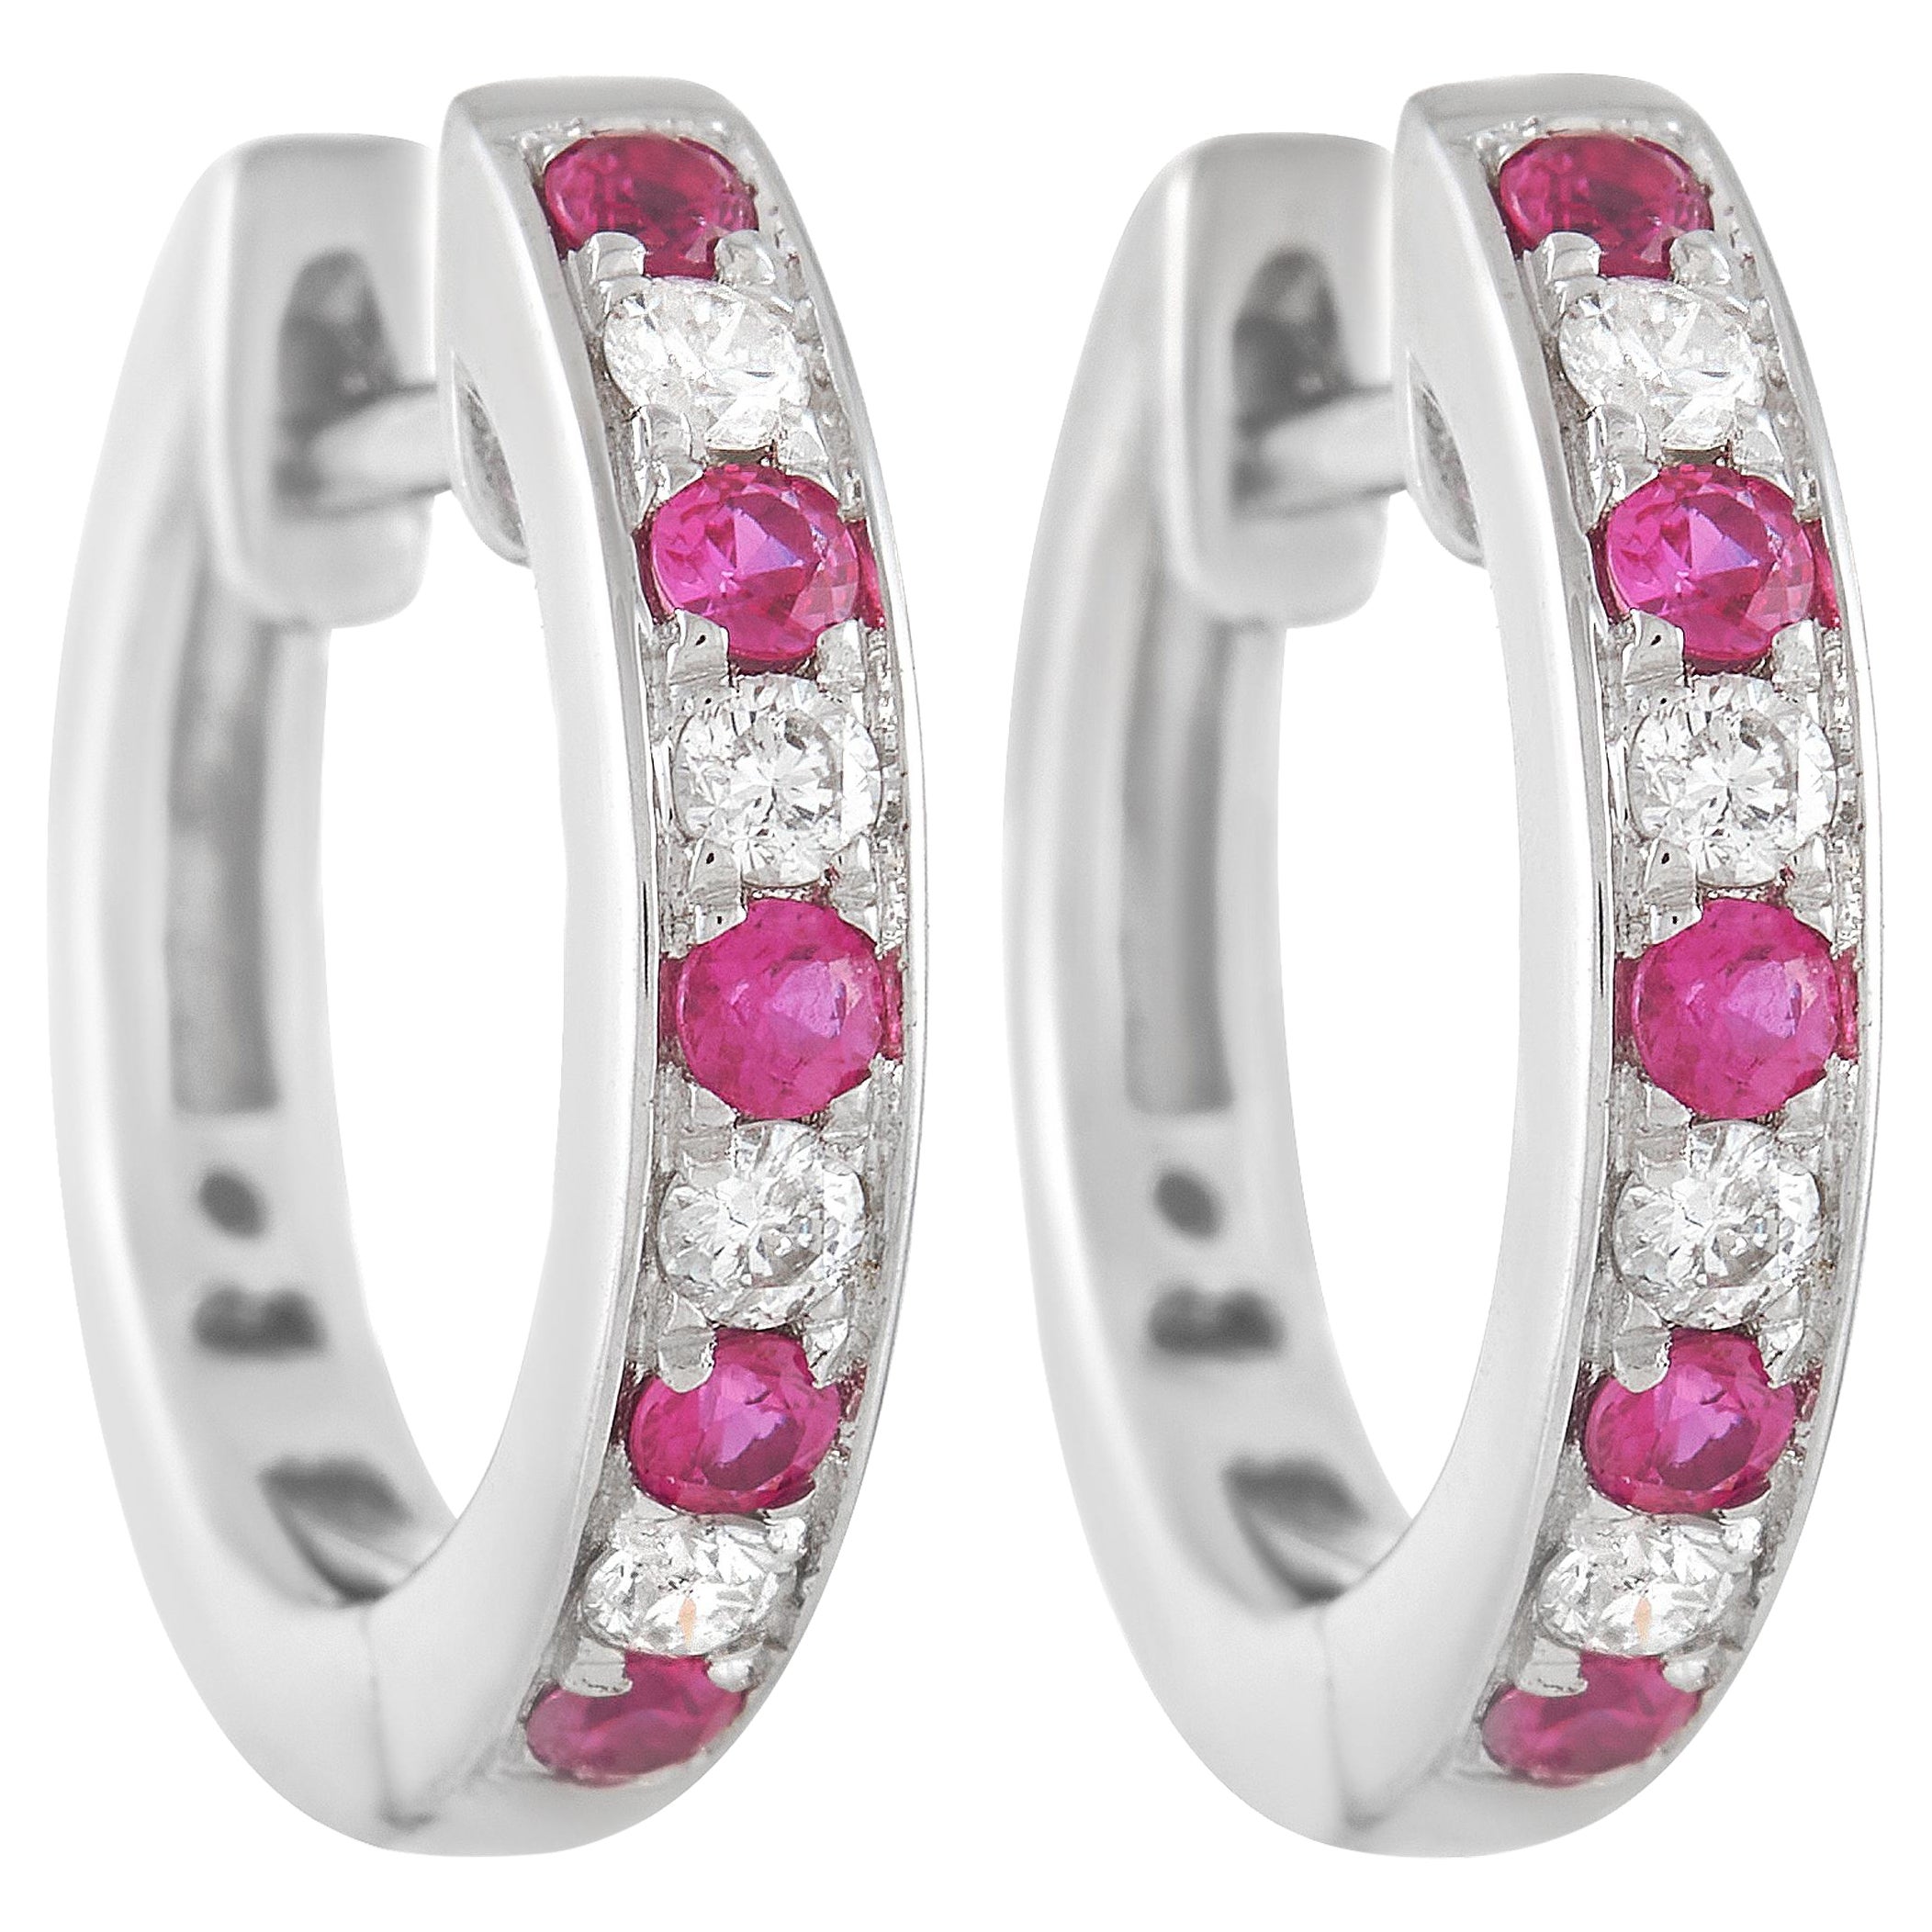 LB Exclusive 14K White Gold 0.15 Ct Diamond and 0.25 Ct Ruby Hoop Earrings For Sale